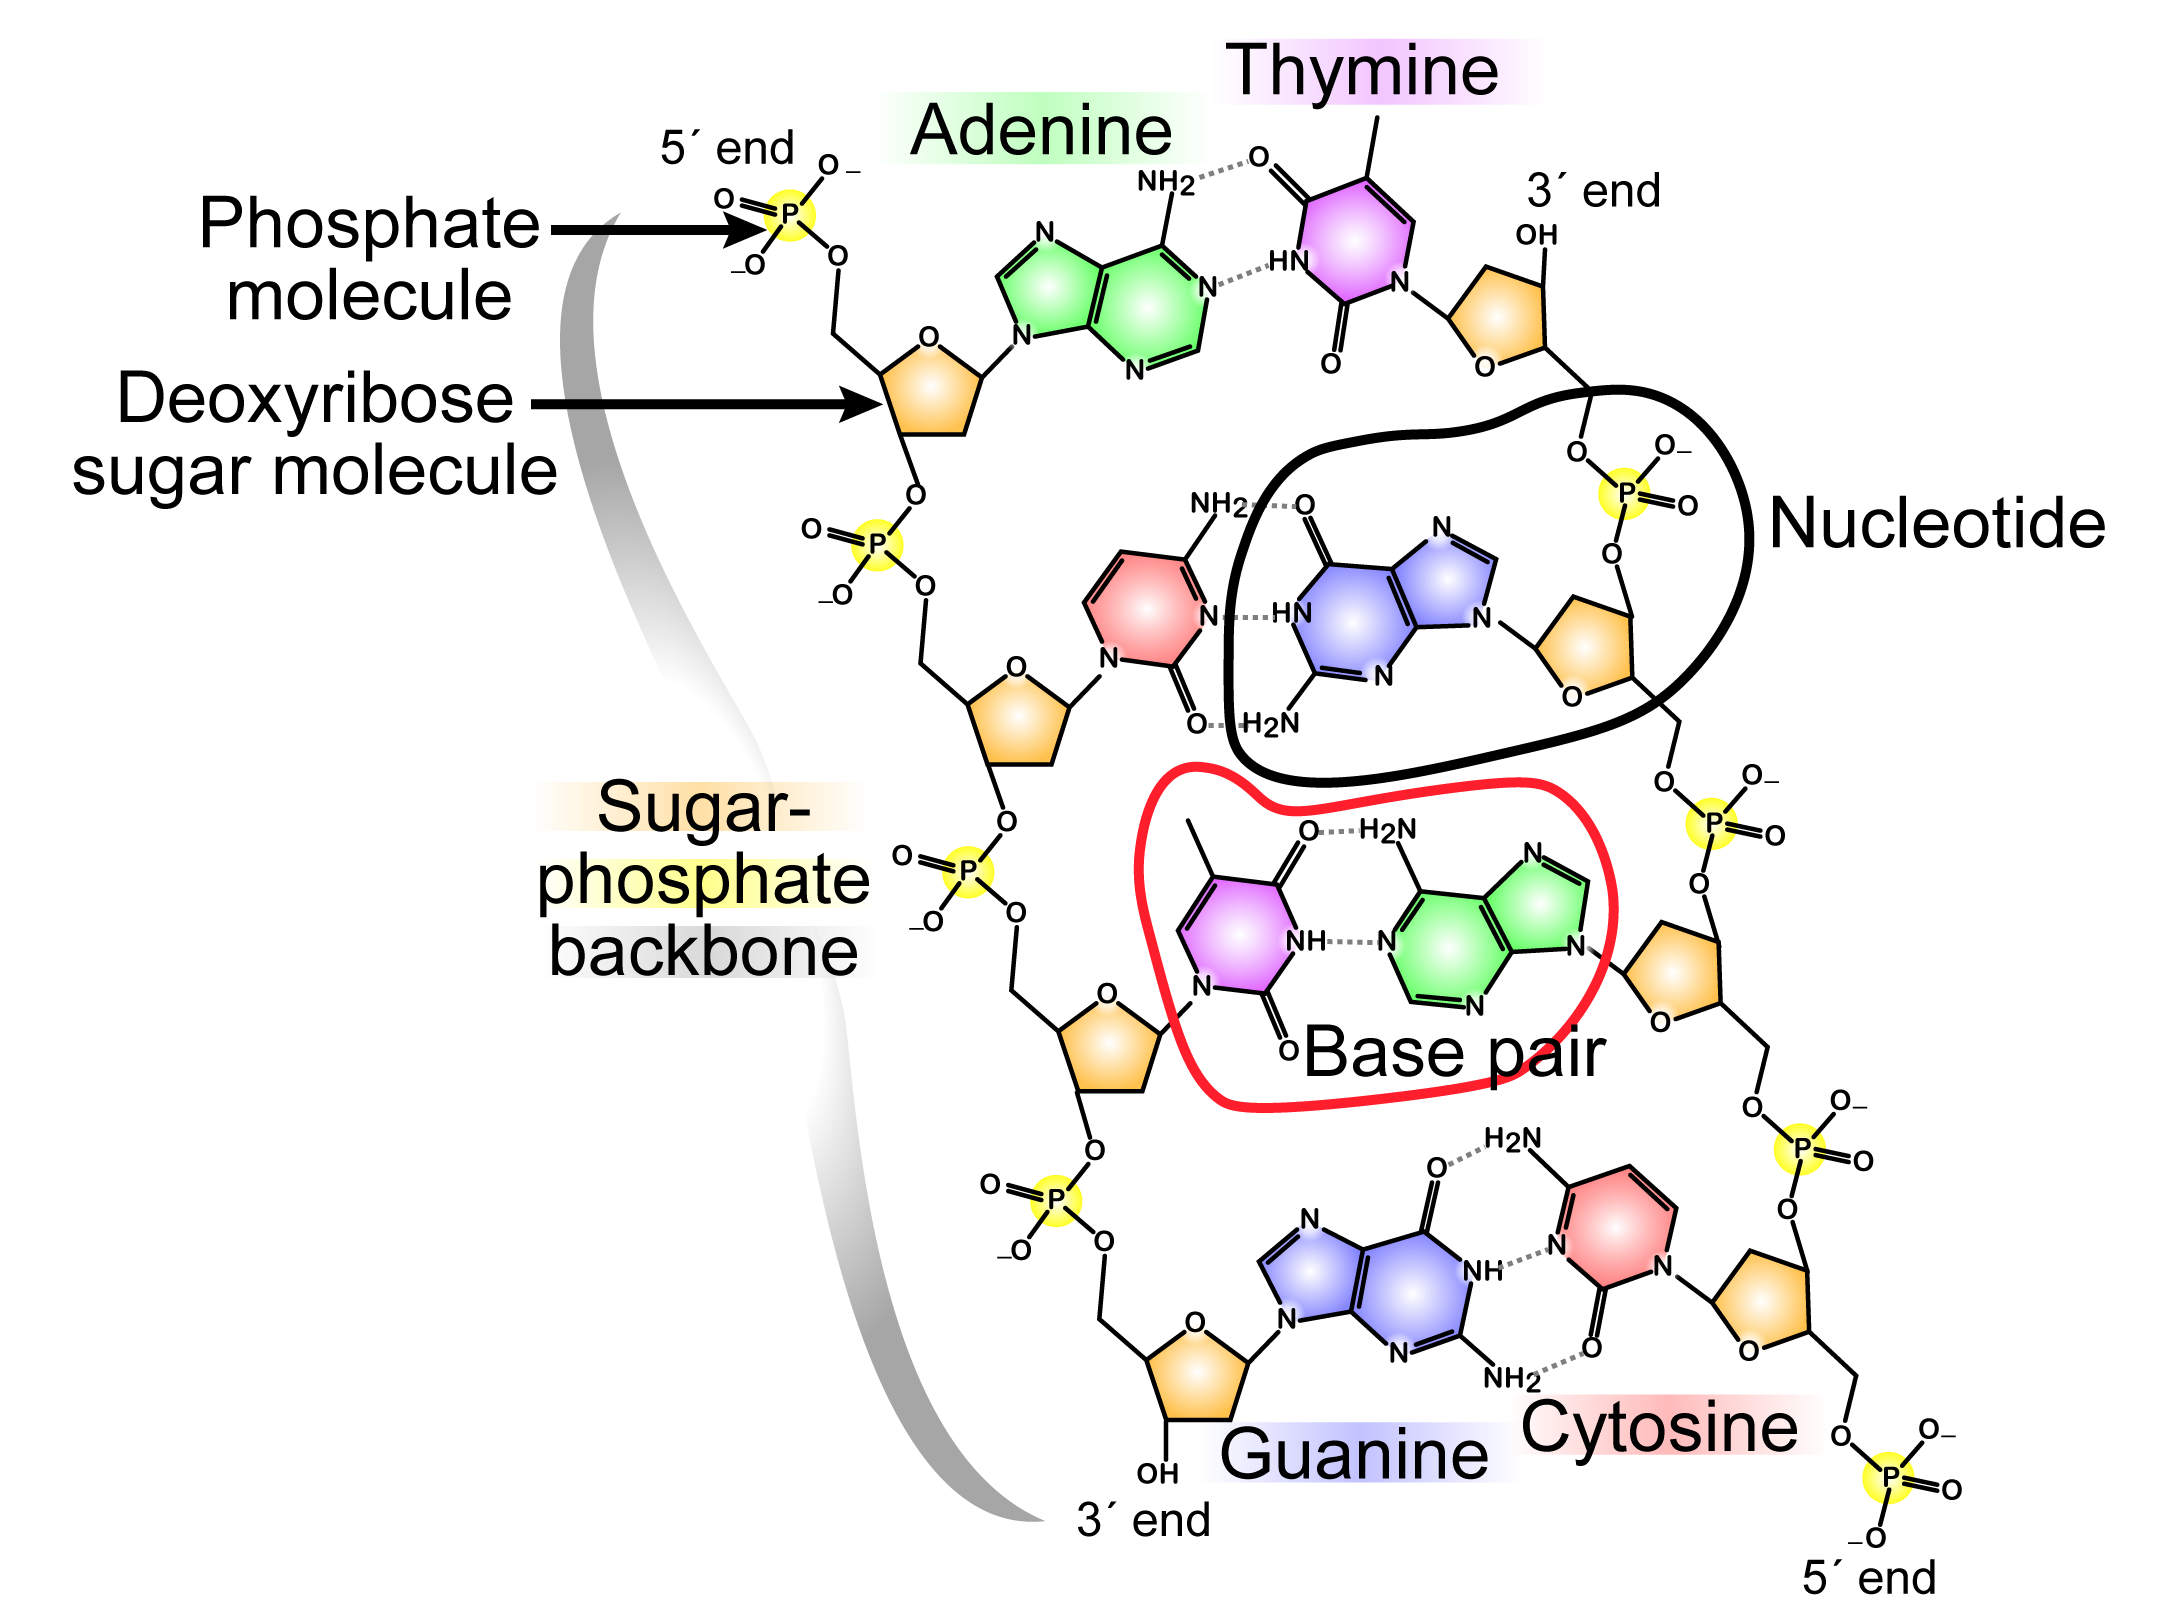 Two-dimensional molecular diagram of a double-stranded DNA molecule. The molecule consists of two sugar-phosphate backbones connected by pairs of nucleotides, adenine with thymine and guanine with cytosine.